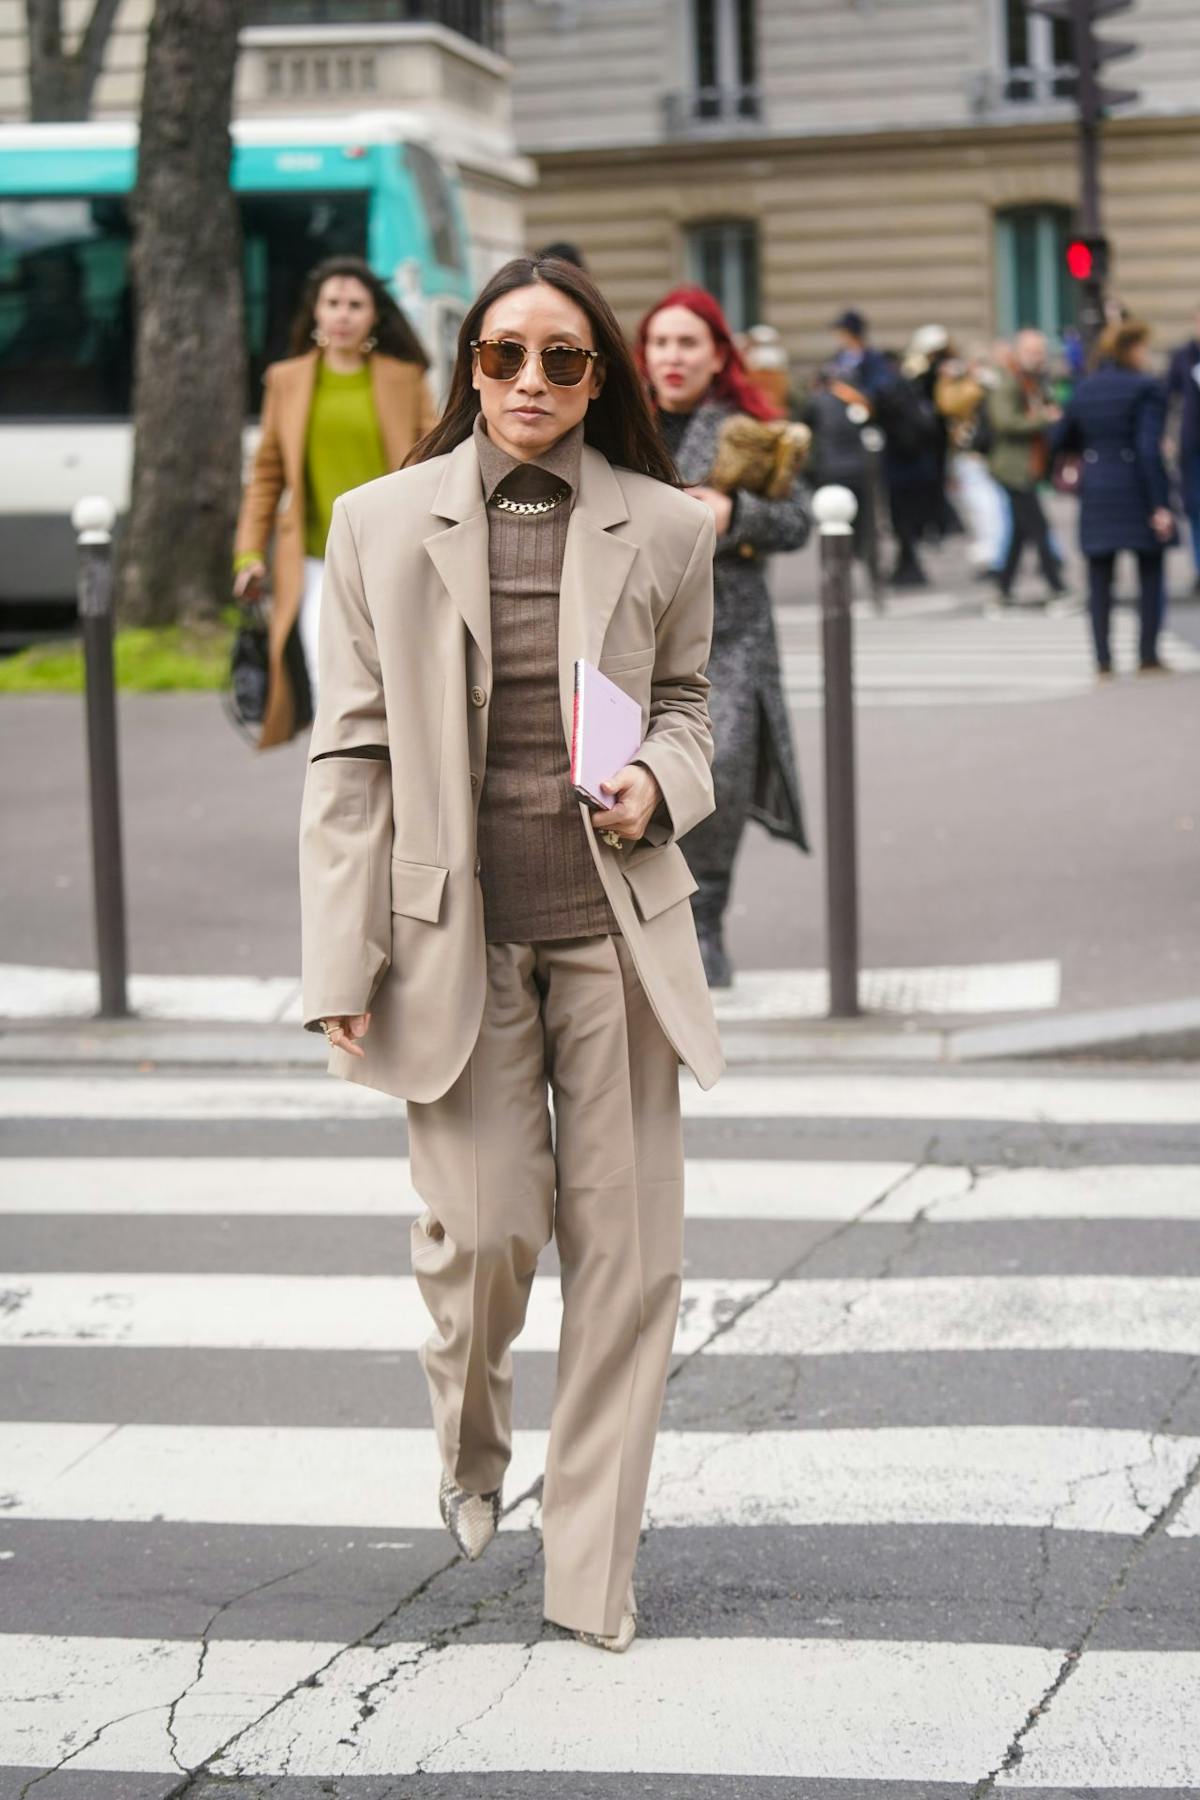 Interview outfits for women: what to wear to a job interview